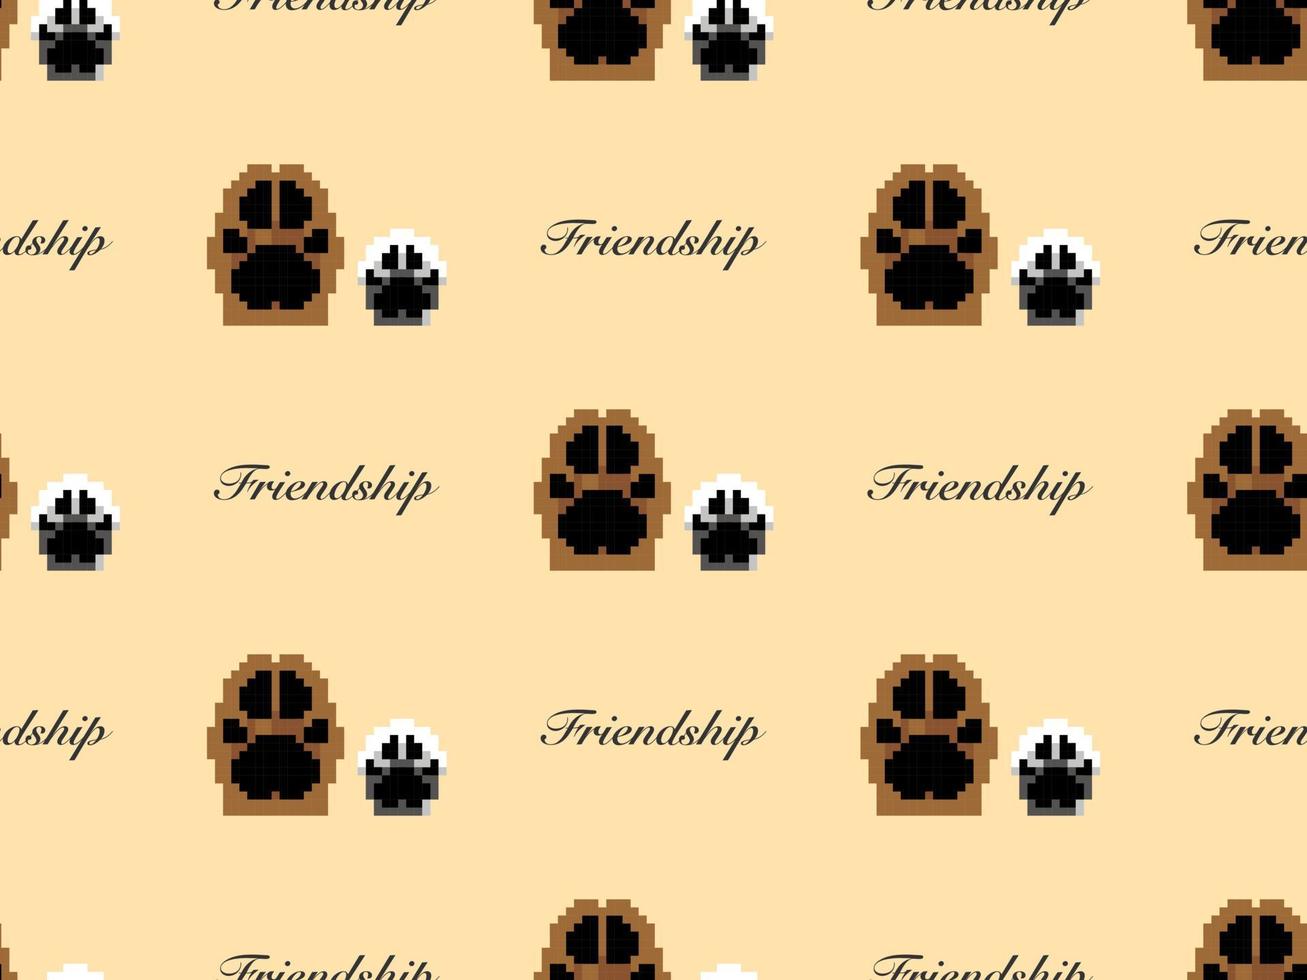 Friendship cartoon character seamless pattern on yellow background. Pixel style vector